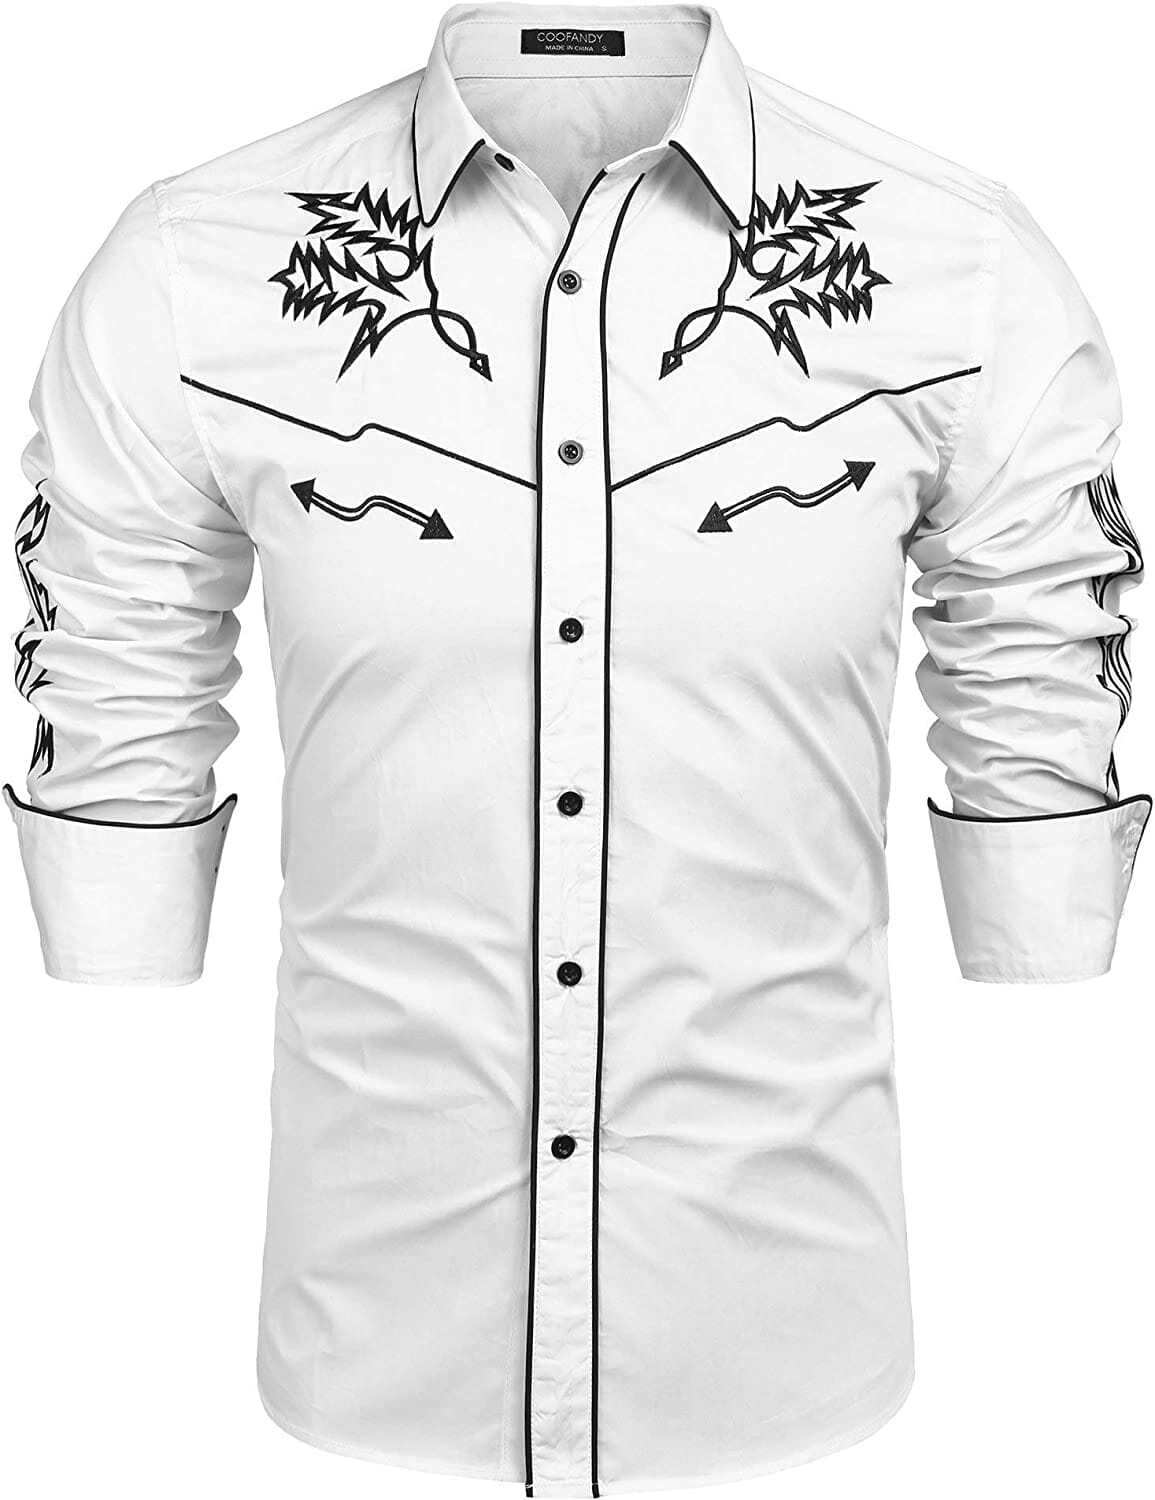 Western Cowboy Embroidered Button Down Cotton Shirt (US Only) Shirts COOFANDY Store White S 